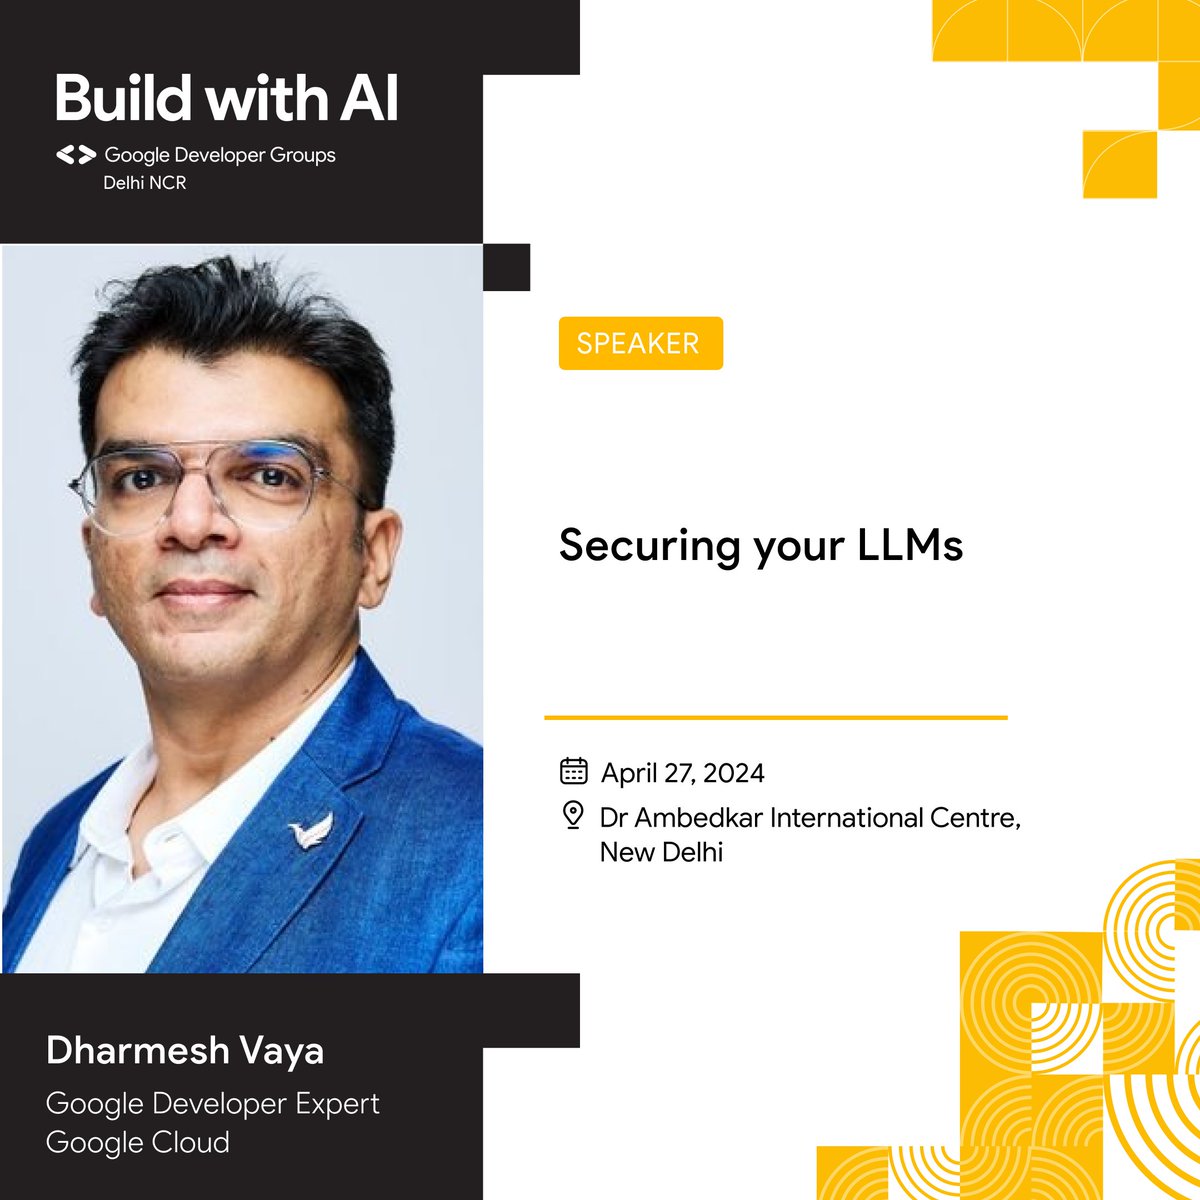 Dharmesh Vaya - Securing LLMs: What's good, Delhi? 🔐 With great AI power comes great responsibility, and nobody understands that better than Dharmesh Vaya, a Google Cloud wizard. He's taking the stage to share straight fire on securing your large language models.